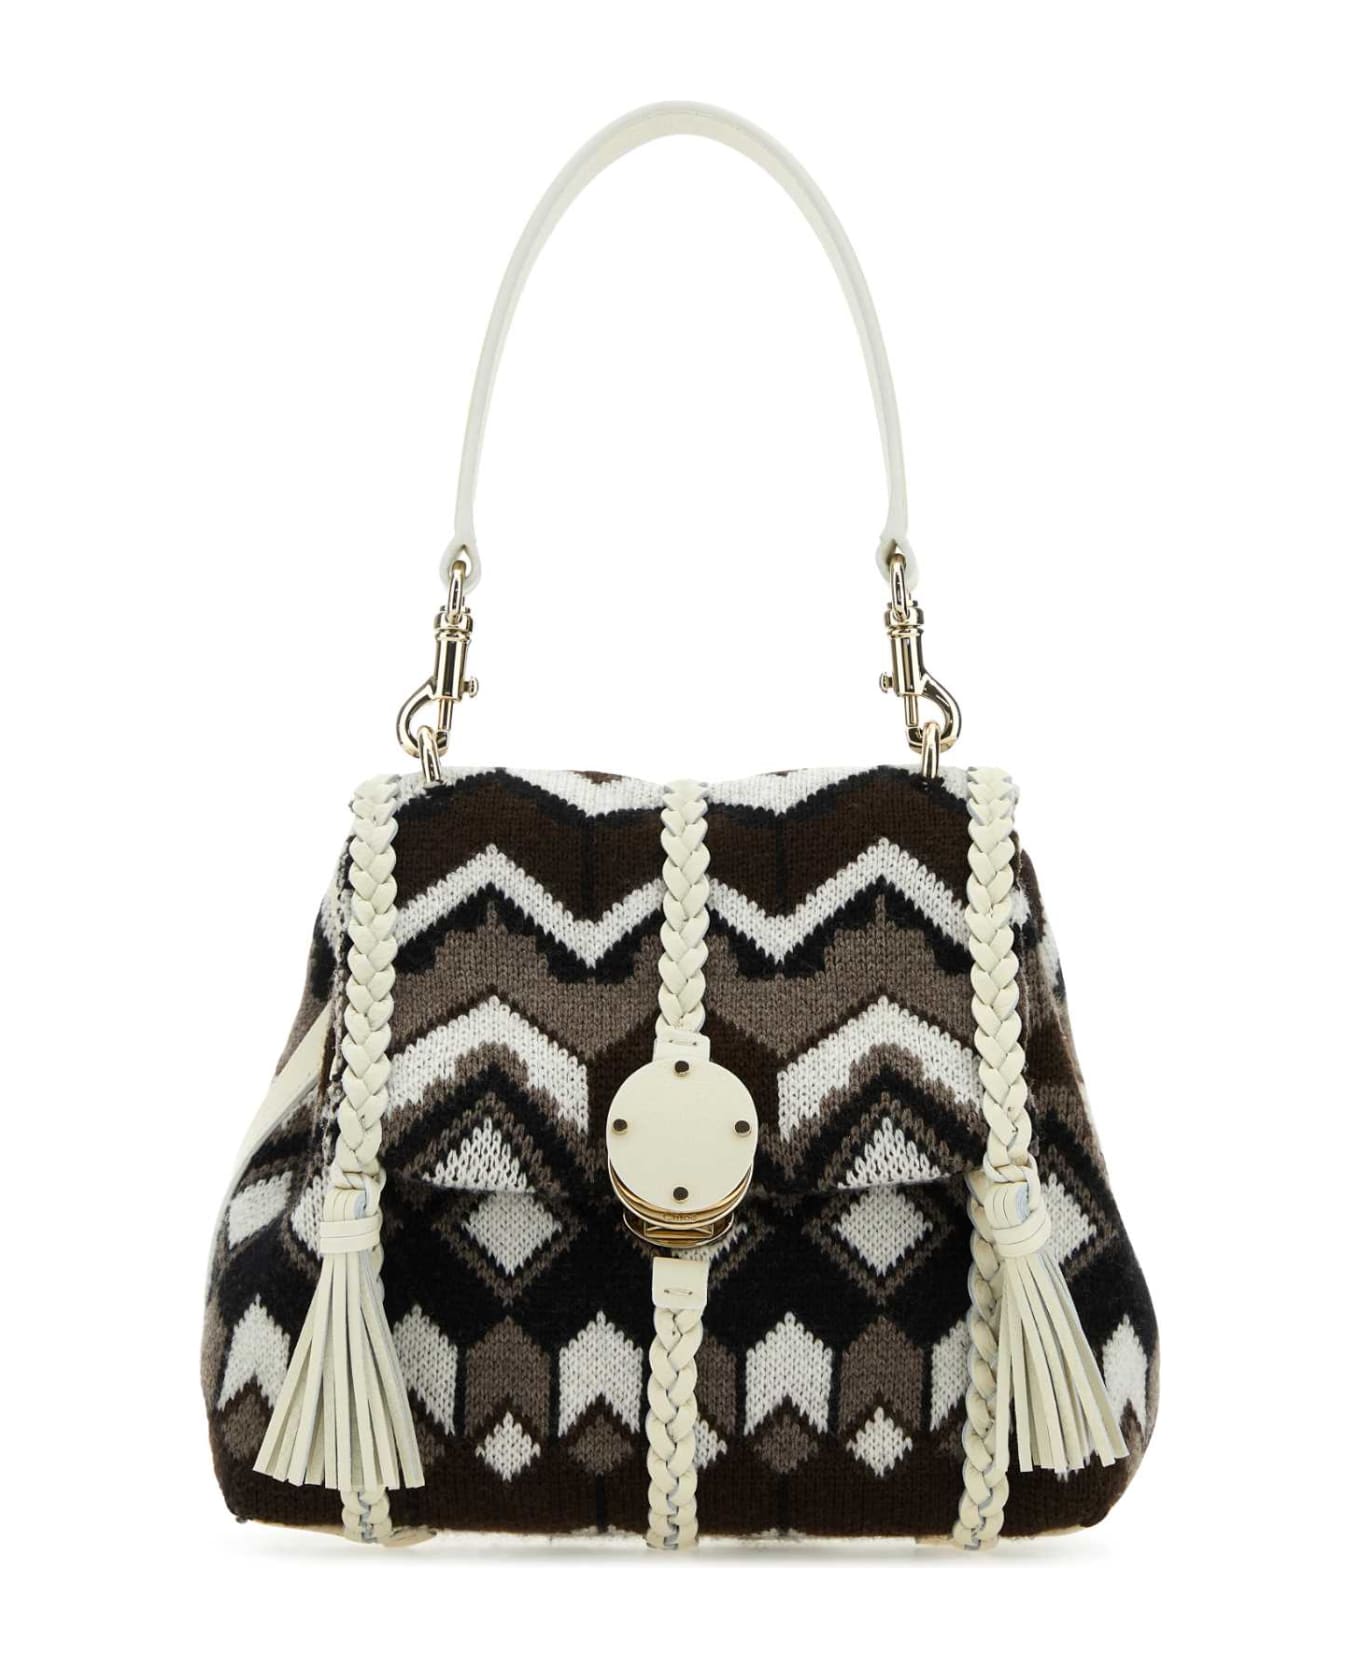 Chloé Embroidered Wool Small Penelope Handbag - MULTICOLORBROWN1 トートバッグ